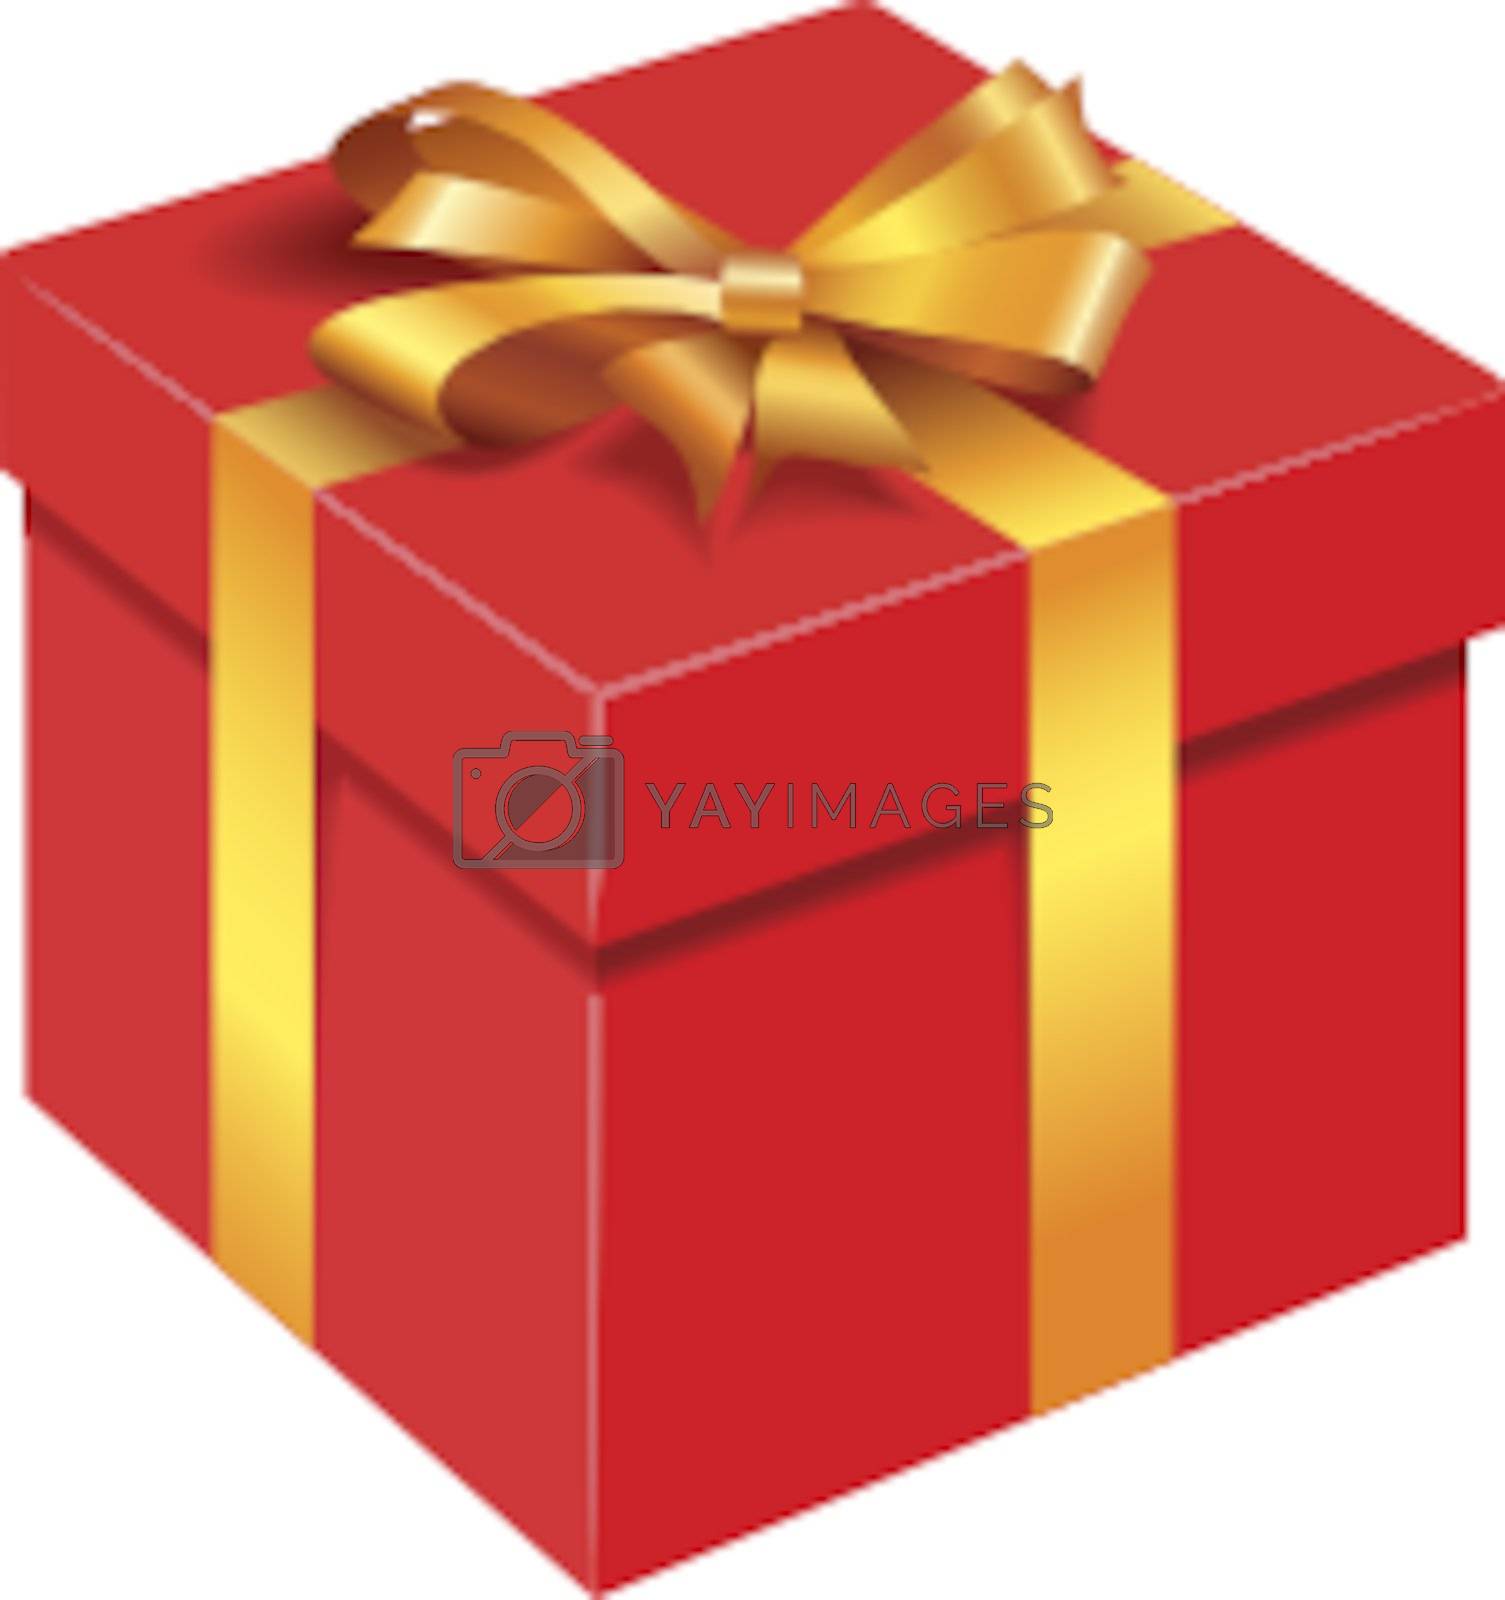 Royalty free image of gift box by martinspurny